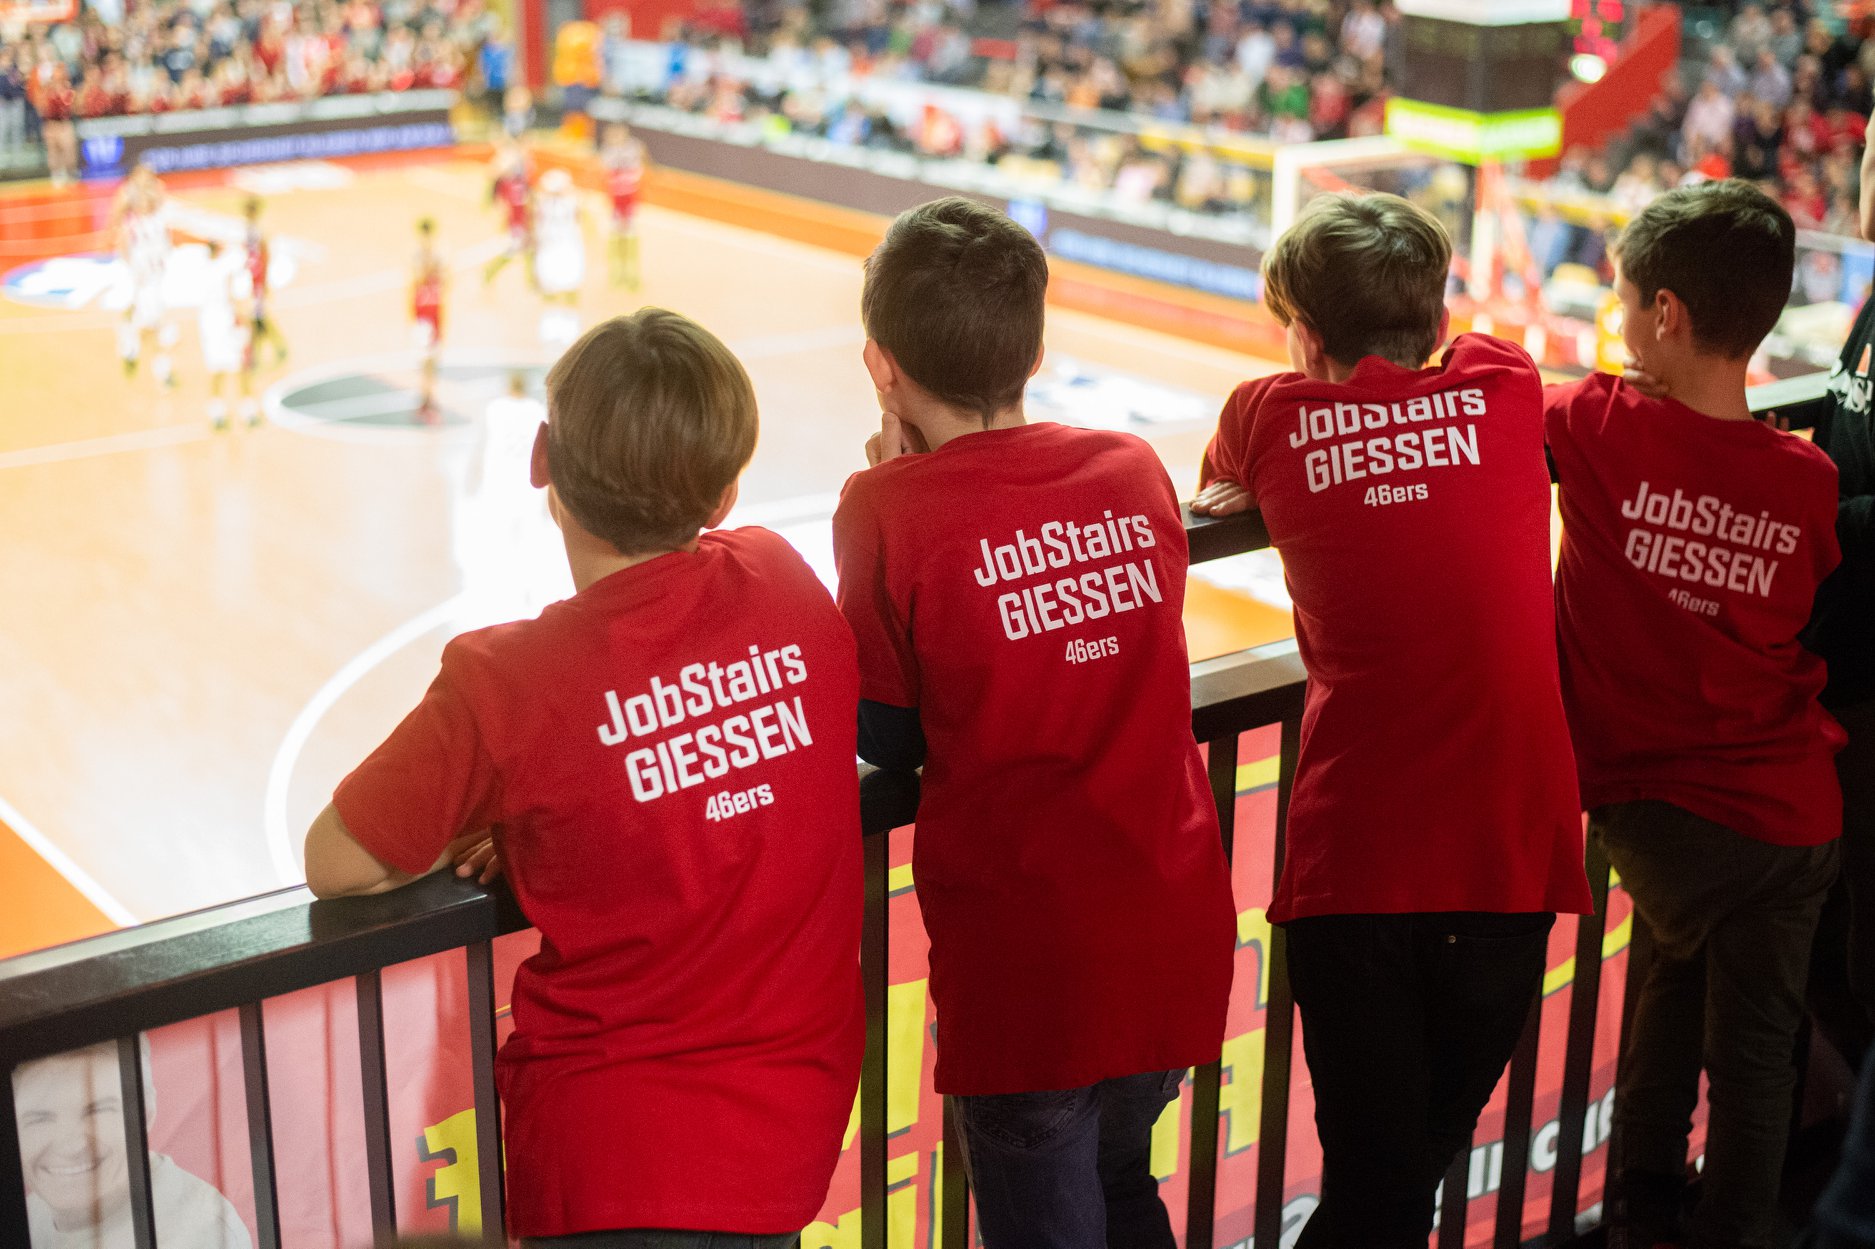 46ers-Youngsters BBA GIESSEN 46ers